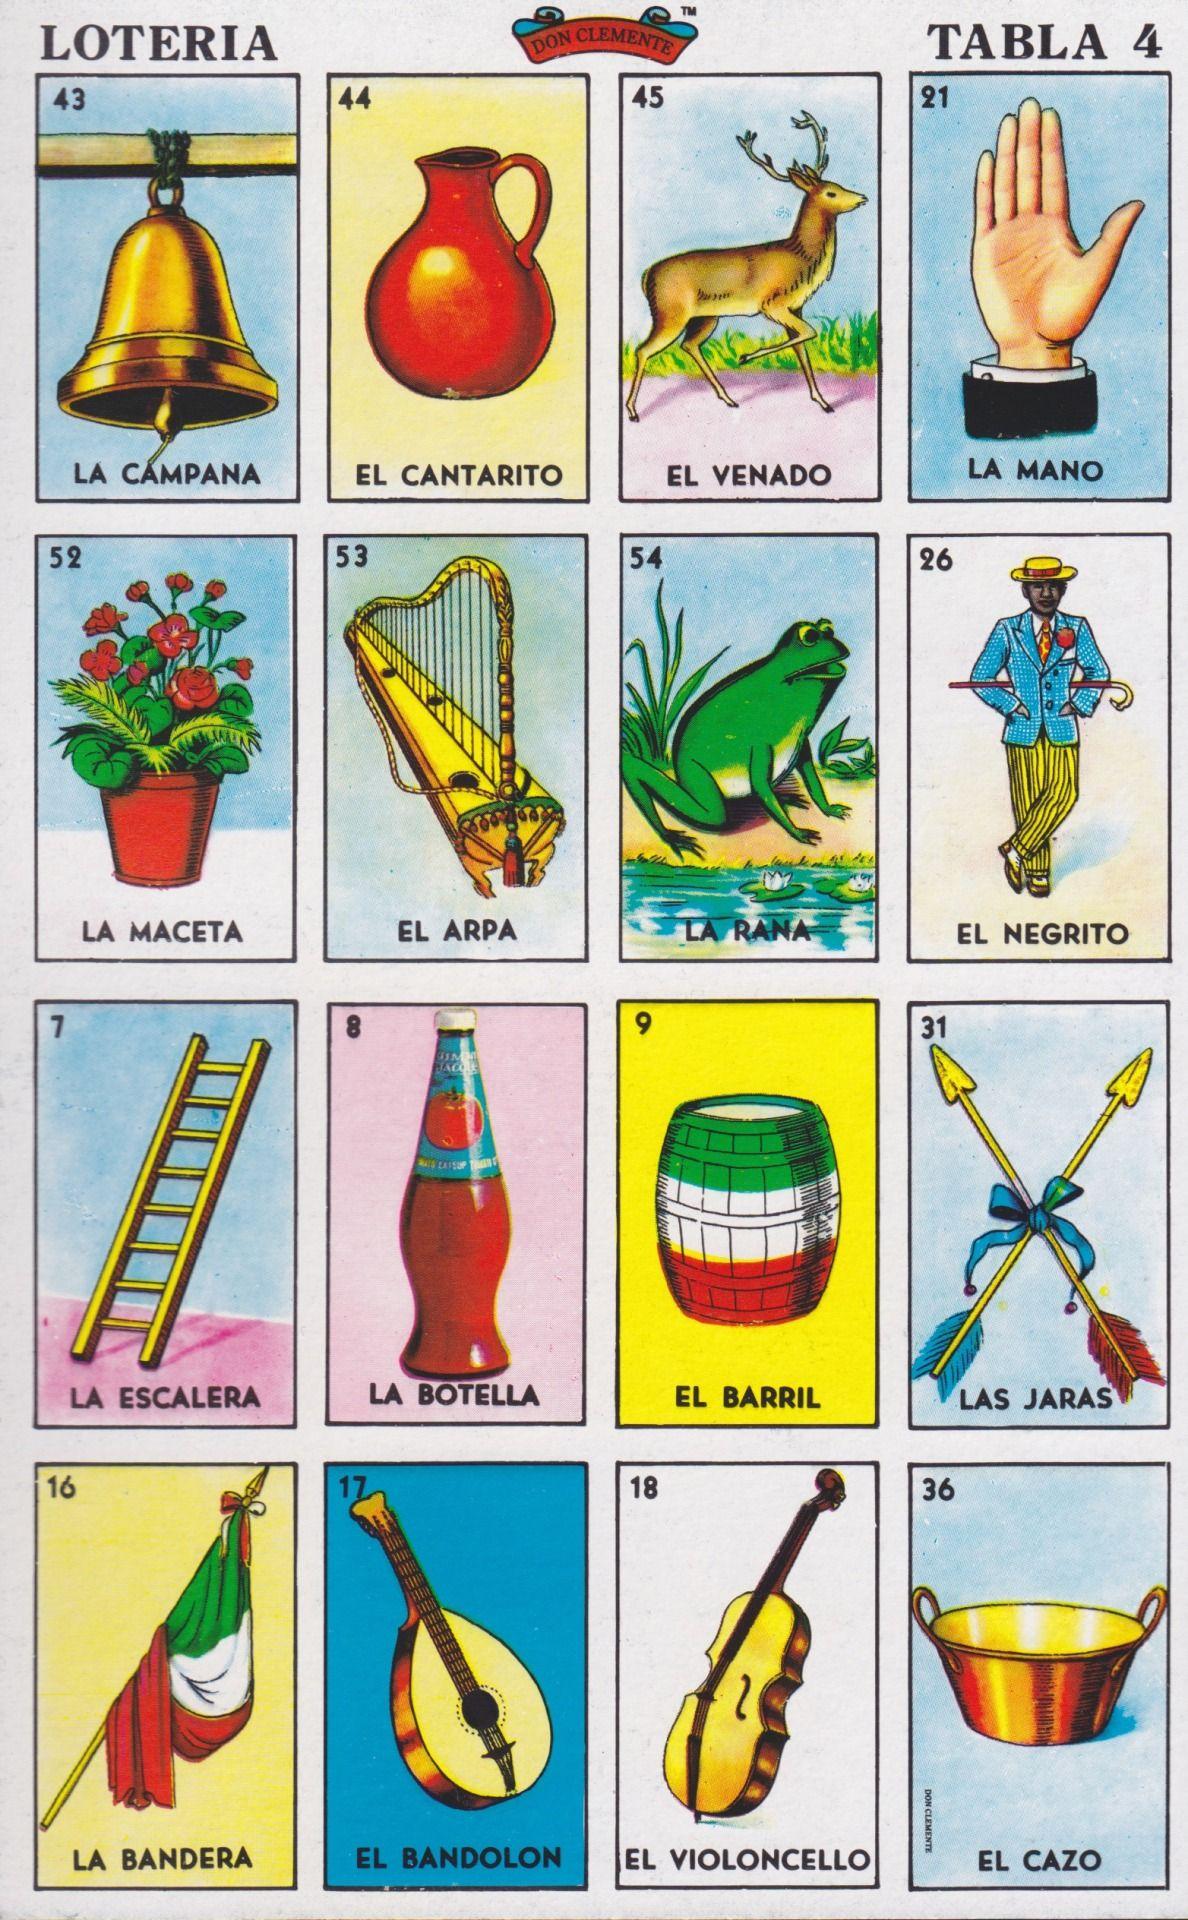 Image Result For Loteria Tabla 4 Loteria Loteria Cards 